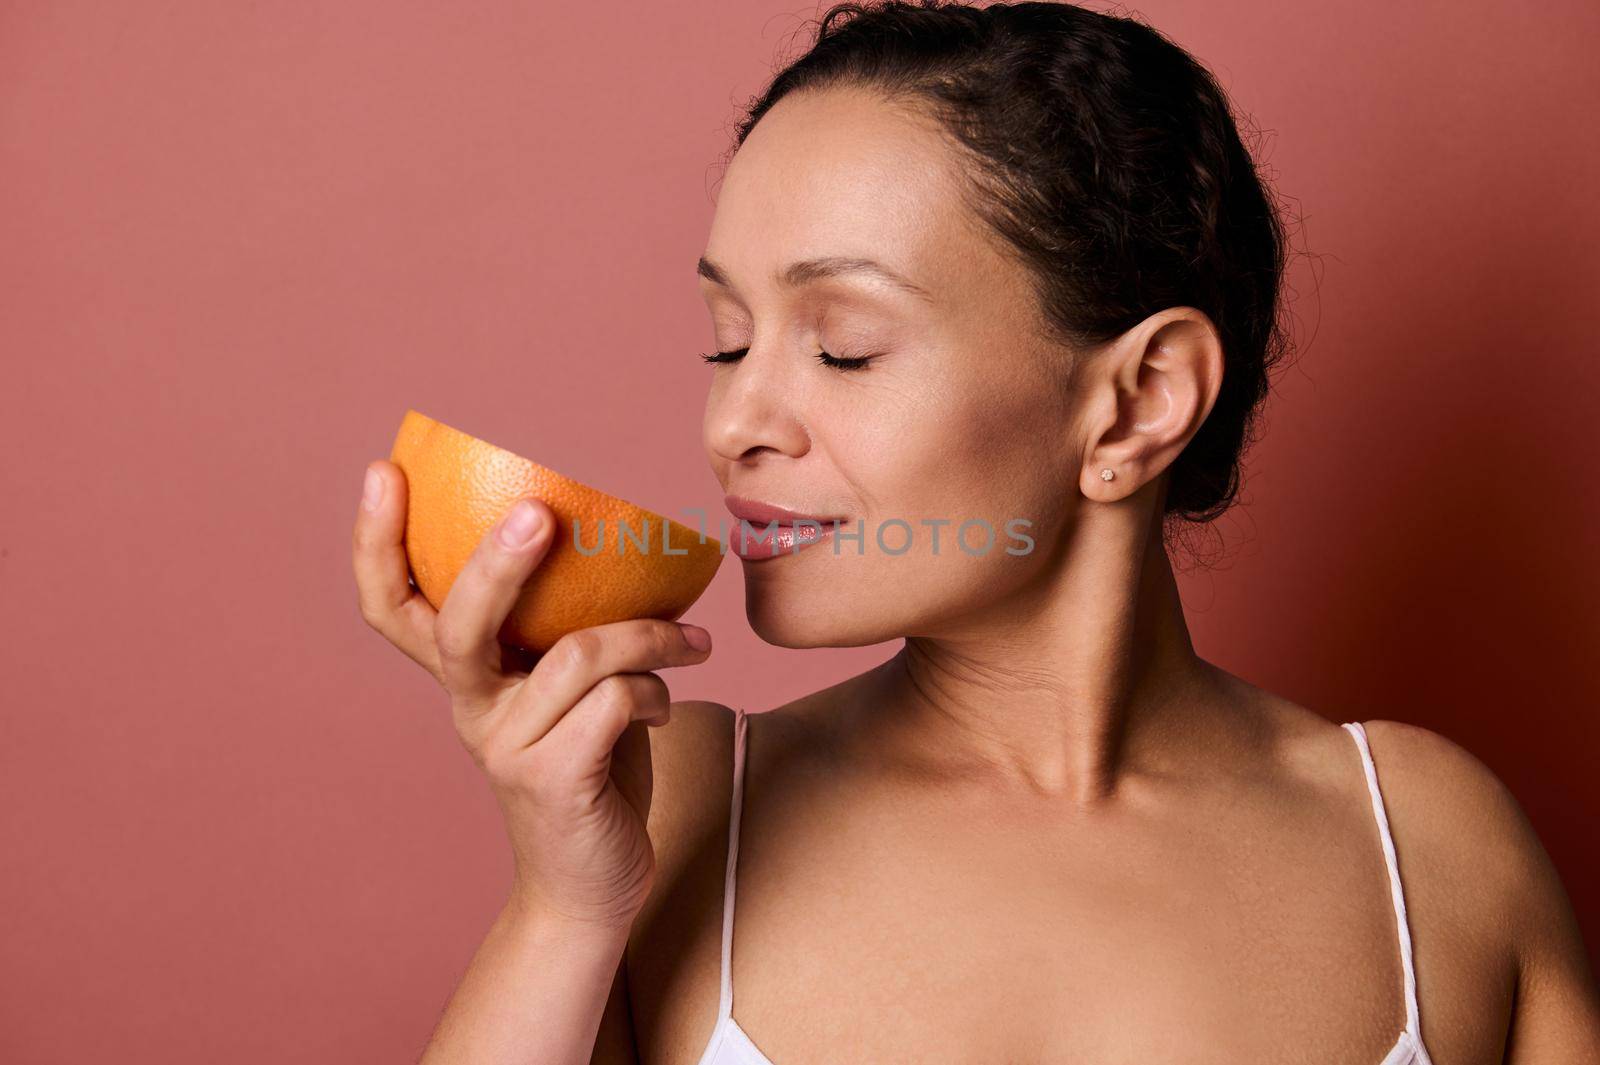 Close-up of dark-haired pretty woman smelling the scent of fresh juicy red grapefruit, posing with closed eyes against coral background with copy space. Health, body positivity and skin care concept.